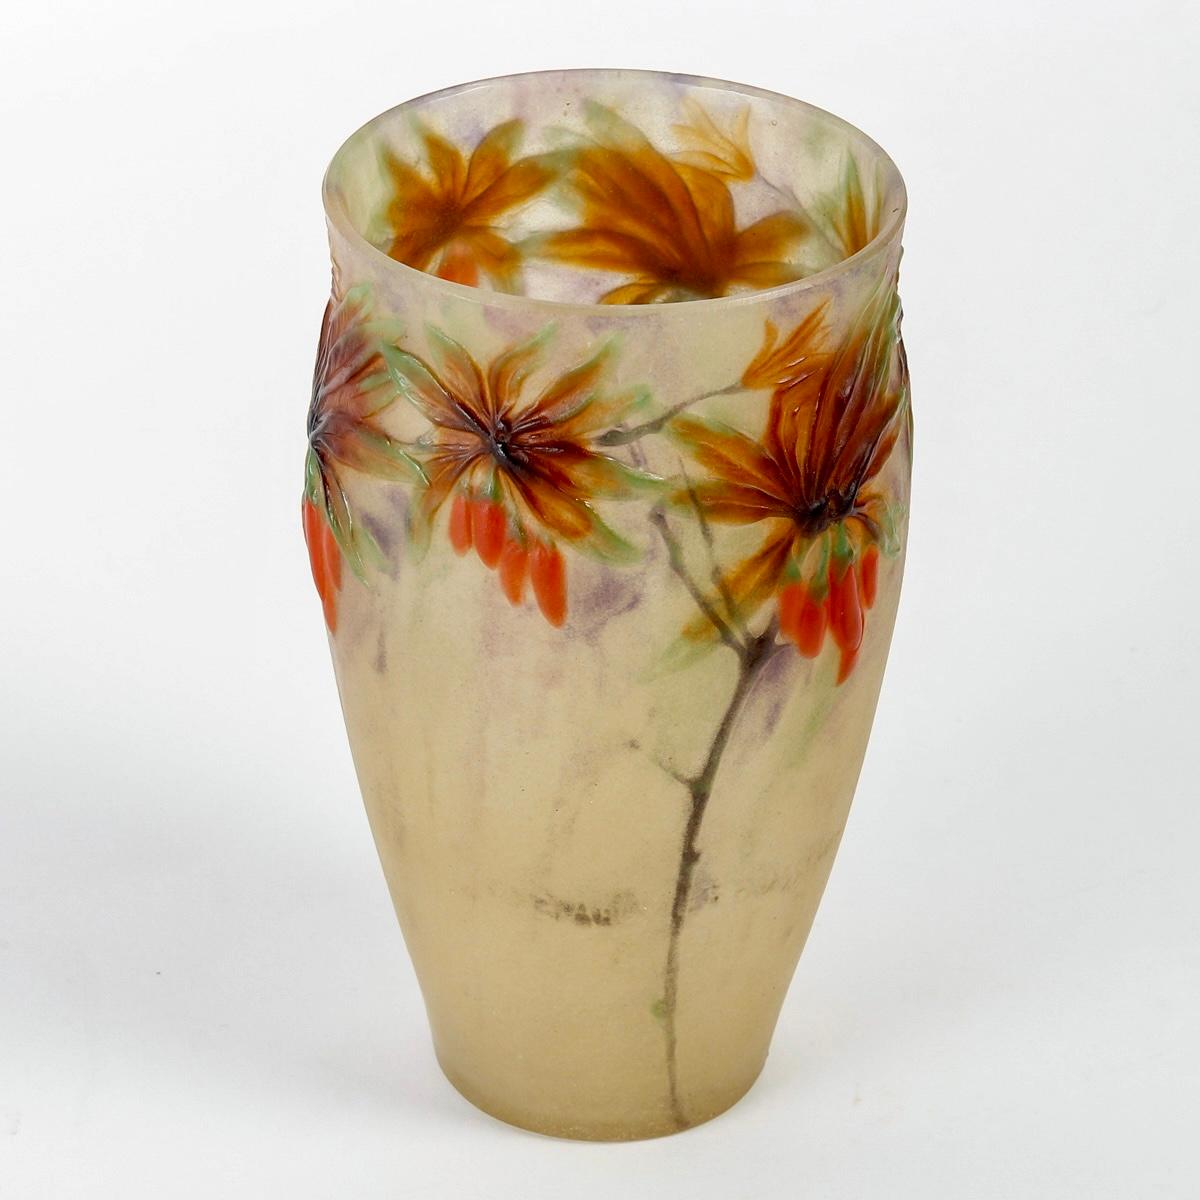 Vase “Lyciet de Barbarie” made in yellow, red, brown and green glass pate de verre by Gabriel Argy-Rousseau in 1917.
Molded signature.

Perfect condition. Sublime colors and extremely rare model.

Height: 15 cm

Janine Bloch-Dermant, Catalogue